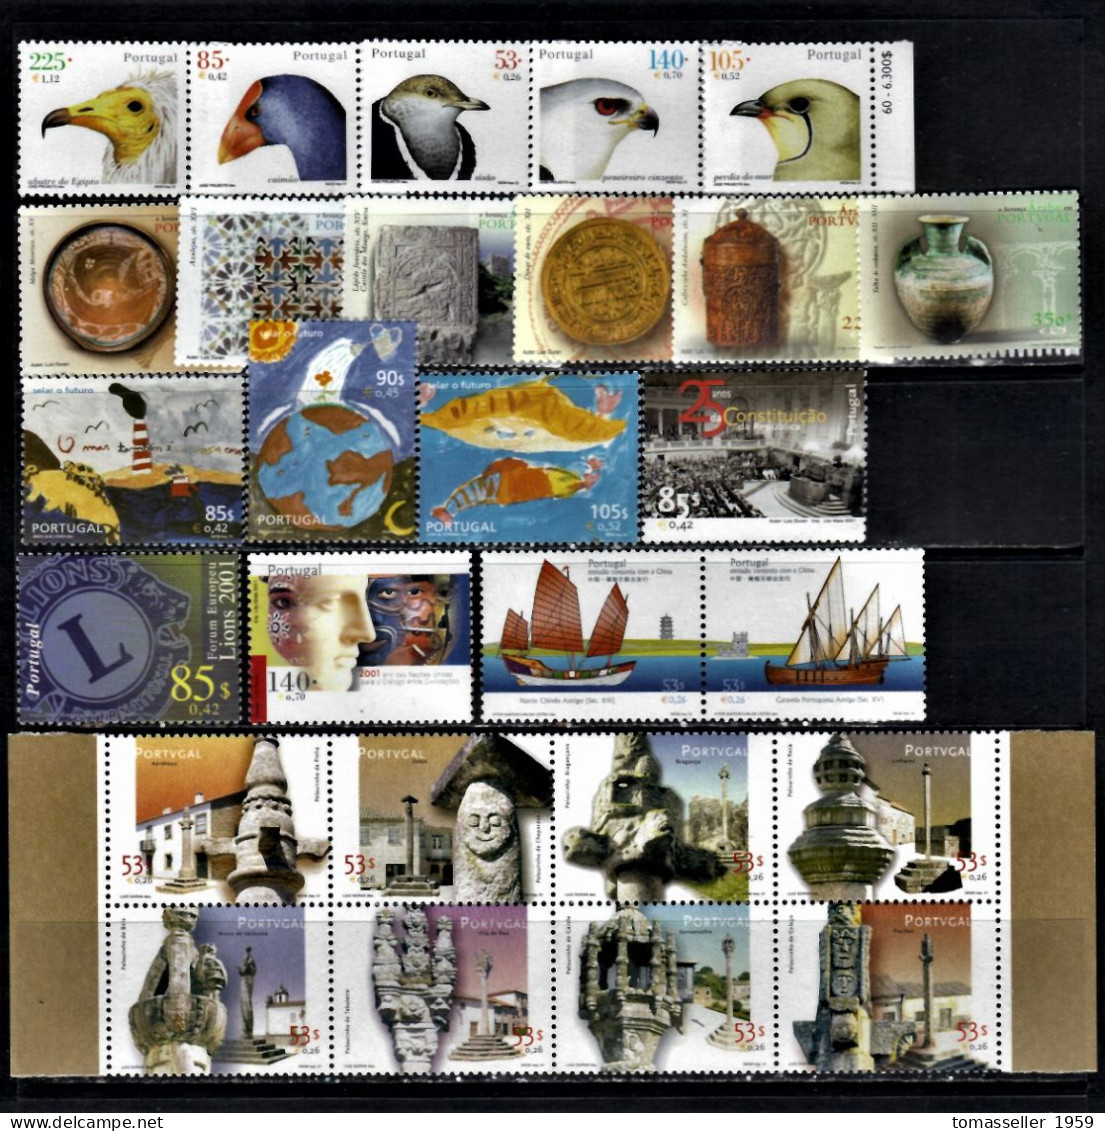 Portugal-2001- Year Set. 19 Issues-(stamps,s/s,booklets)-MNH** - Années Complètes